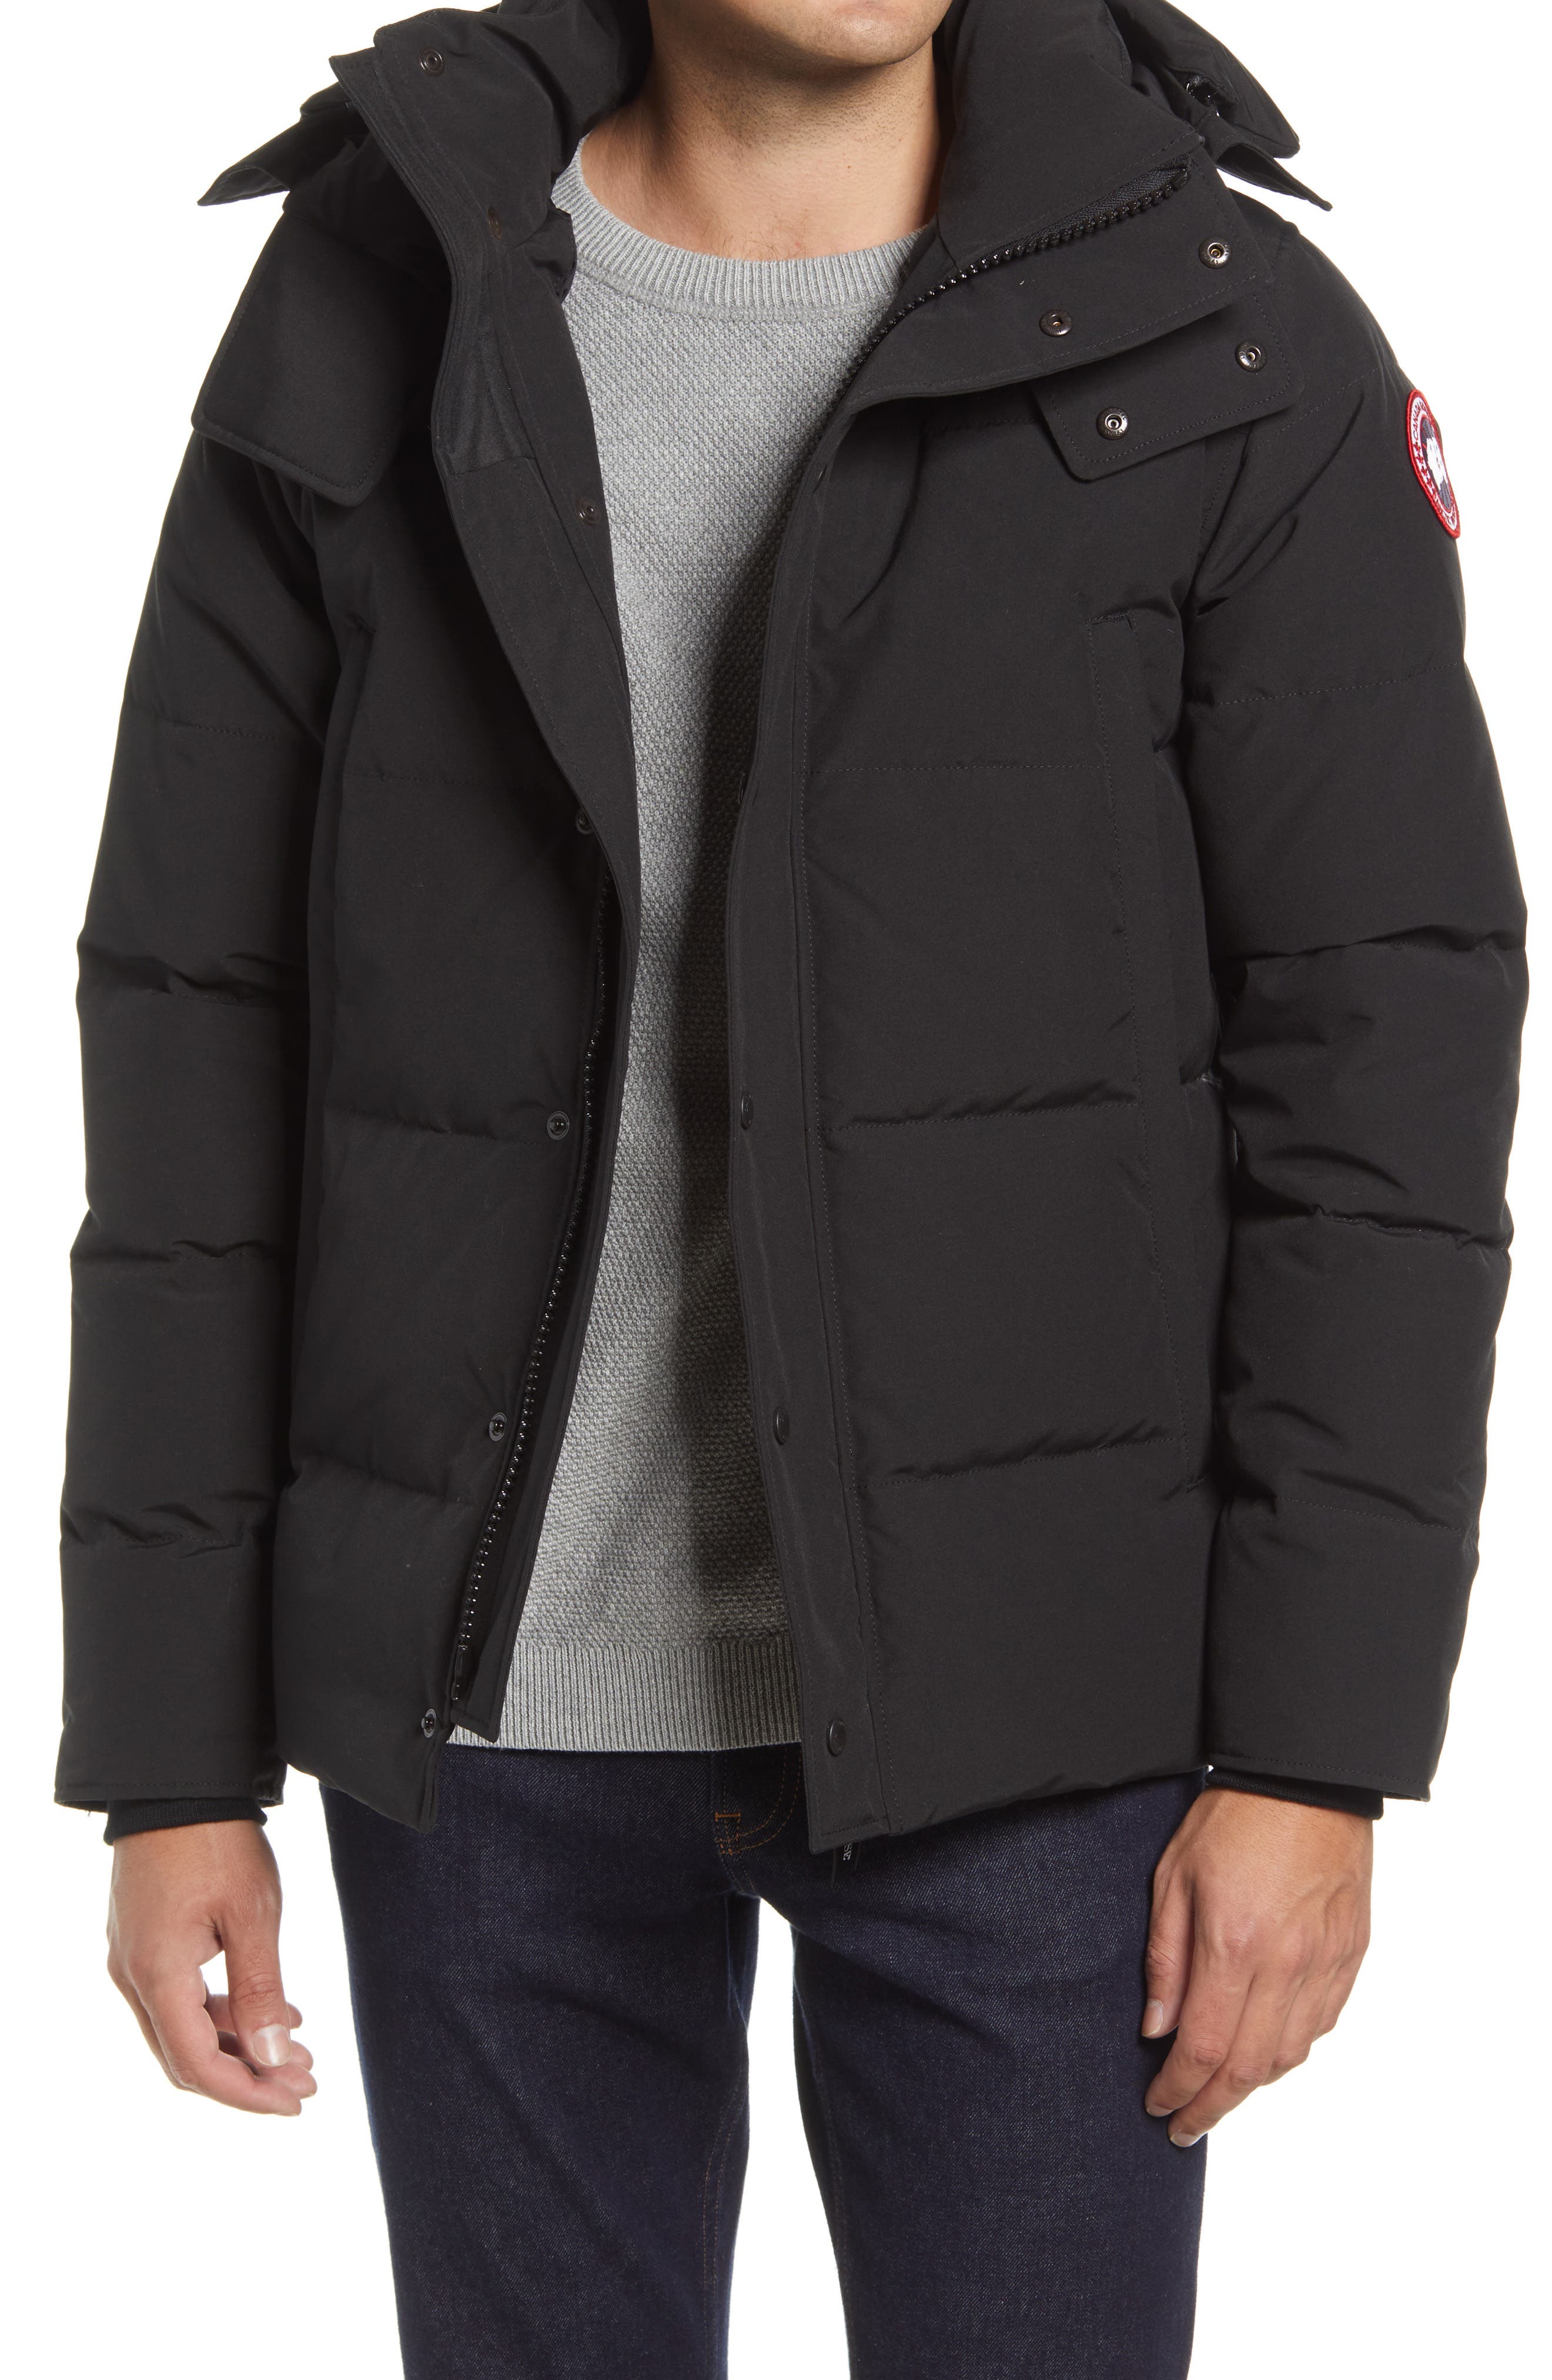 Canada Goose Men's Wyndham Fusion Fit 625 Fill Power Hooded Down Jacket in Black at Nordstrom, Size X-Large